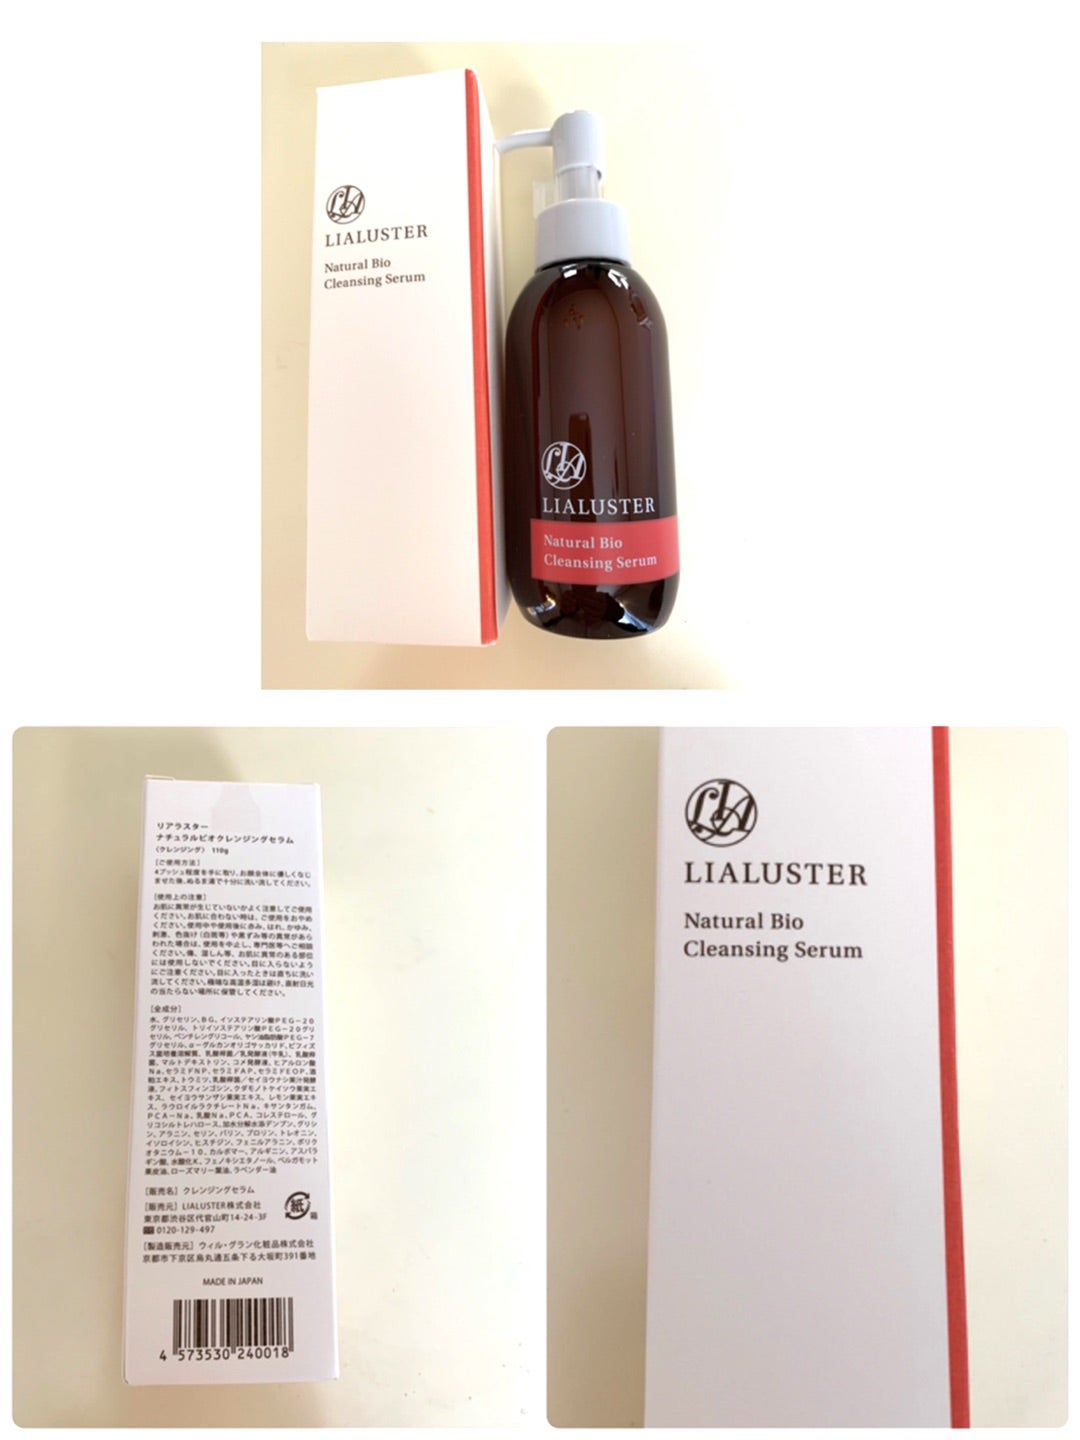 LIALUSTER(リアラスター) Natural Bio Cleansing Serum | いるかちゃんの旅行と懸賞の日記